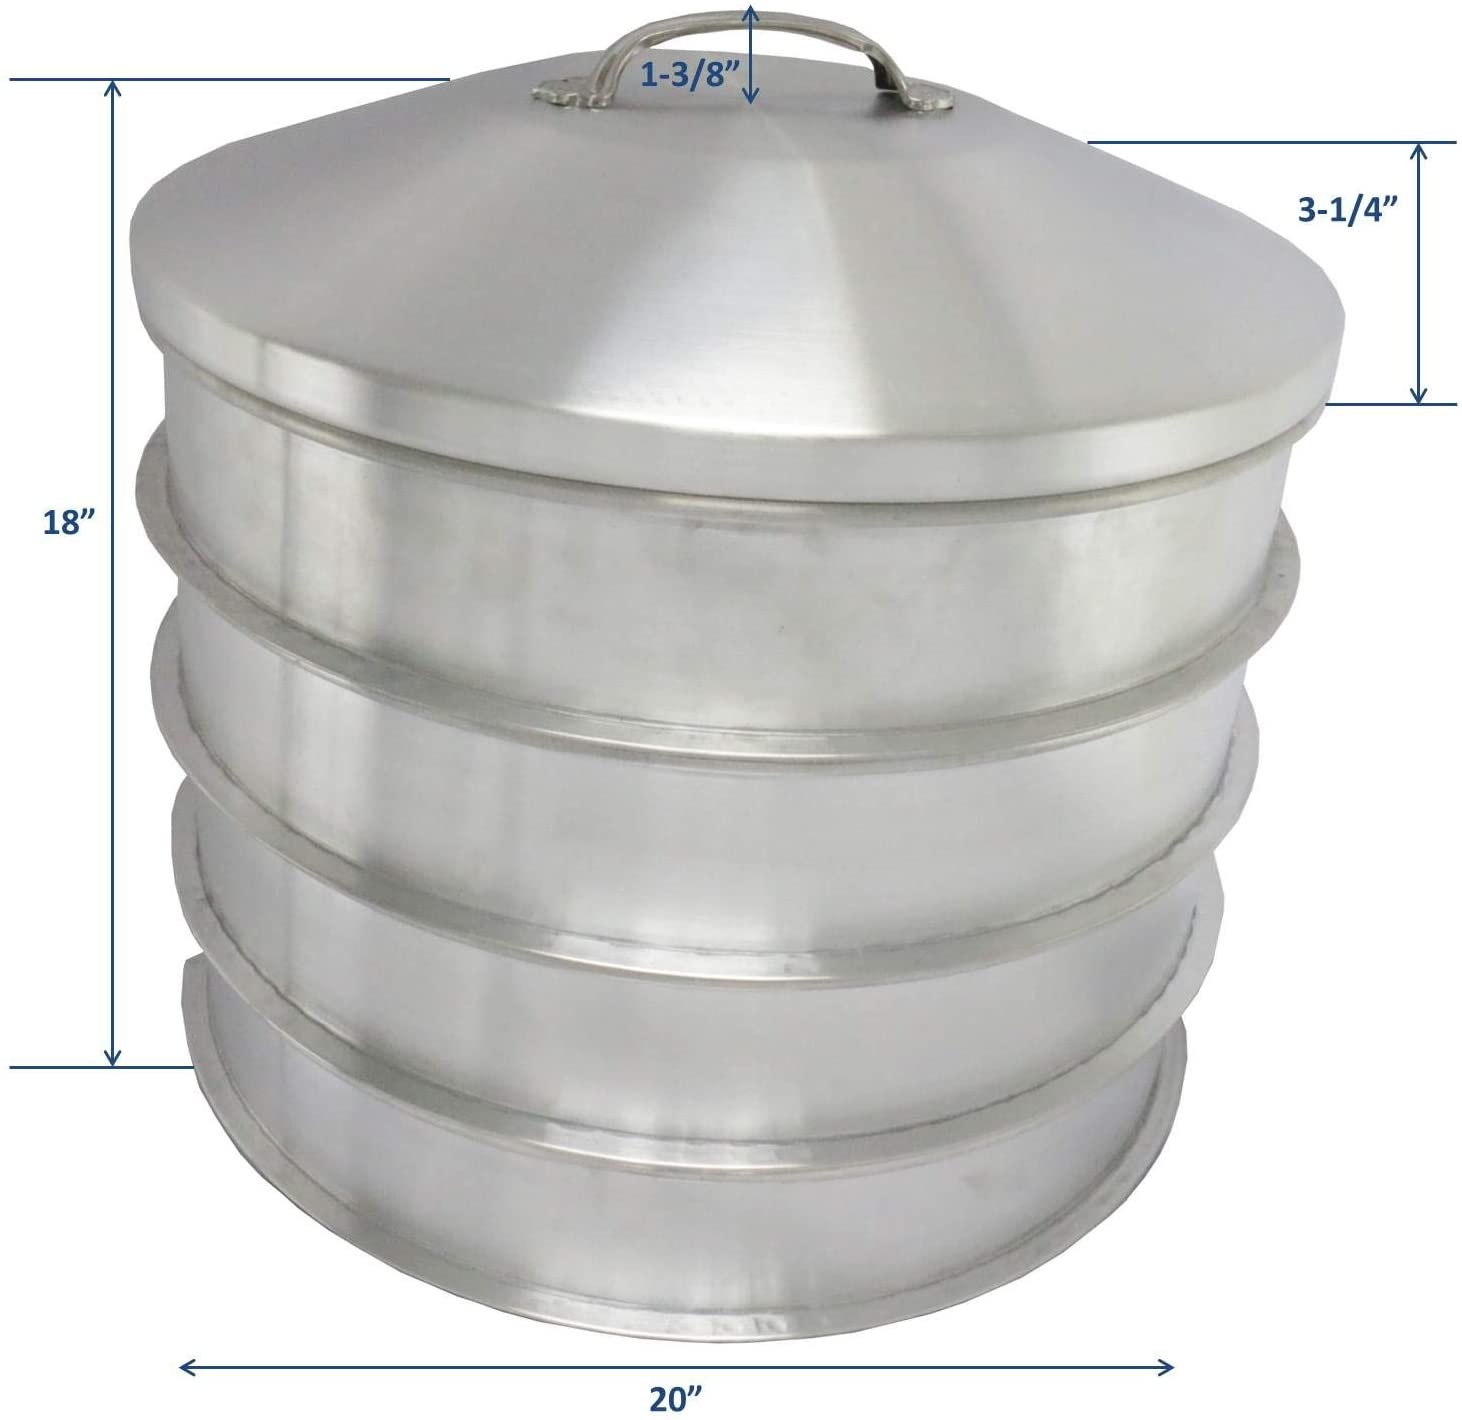 Leyso 4 Aluminum Steam Rack with 1 Steam Cap Set, 20" D x 3-1/2" H - Great for Dim Sum, Vegetables, Meat and Fish (5 Piece Set)